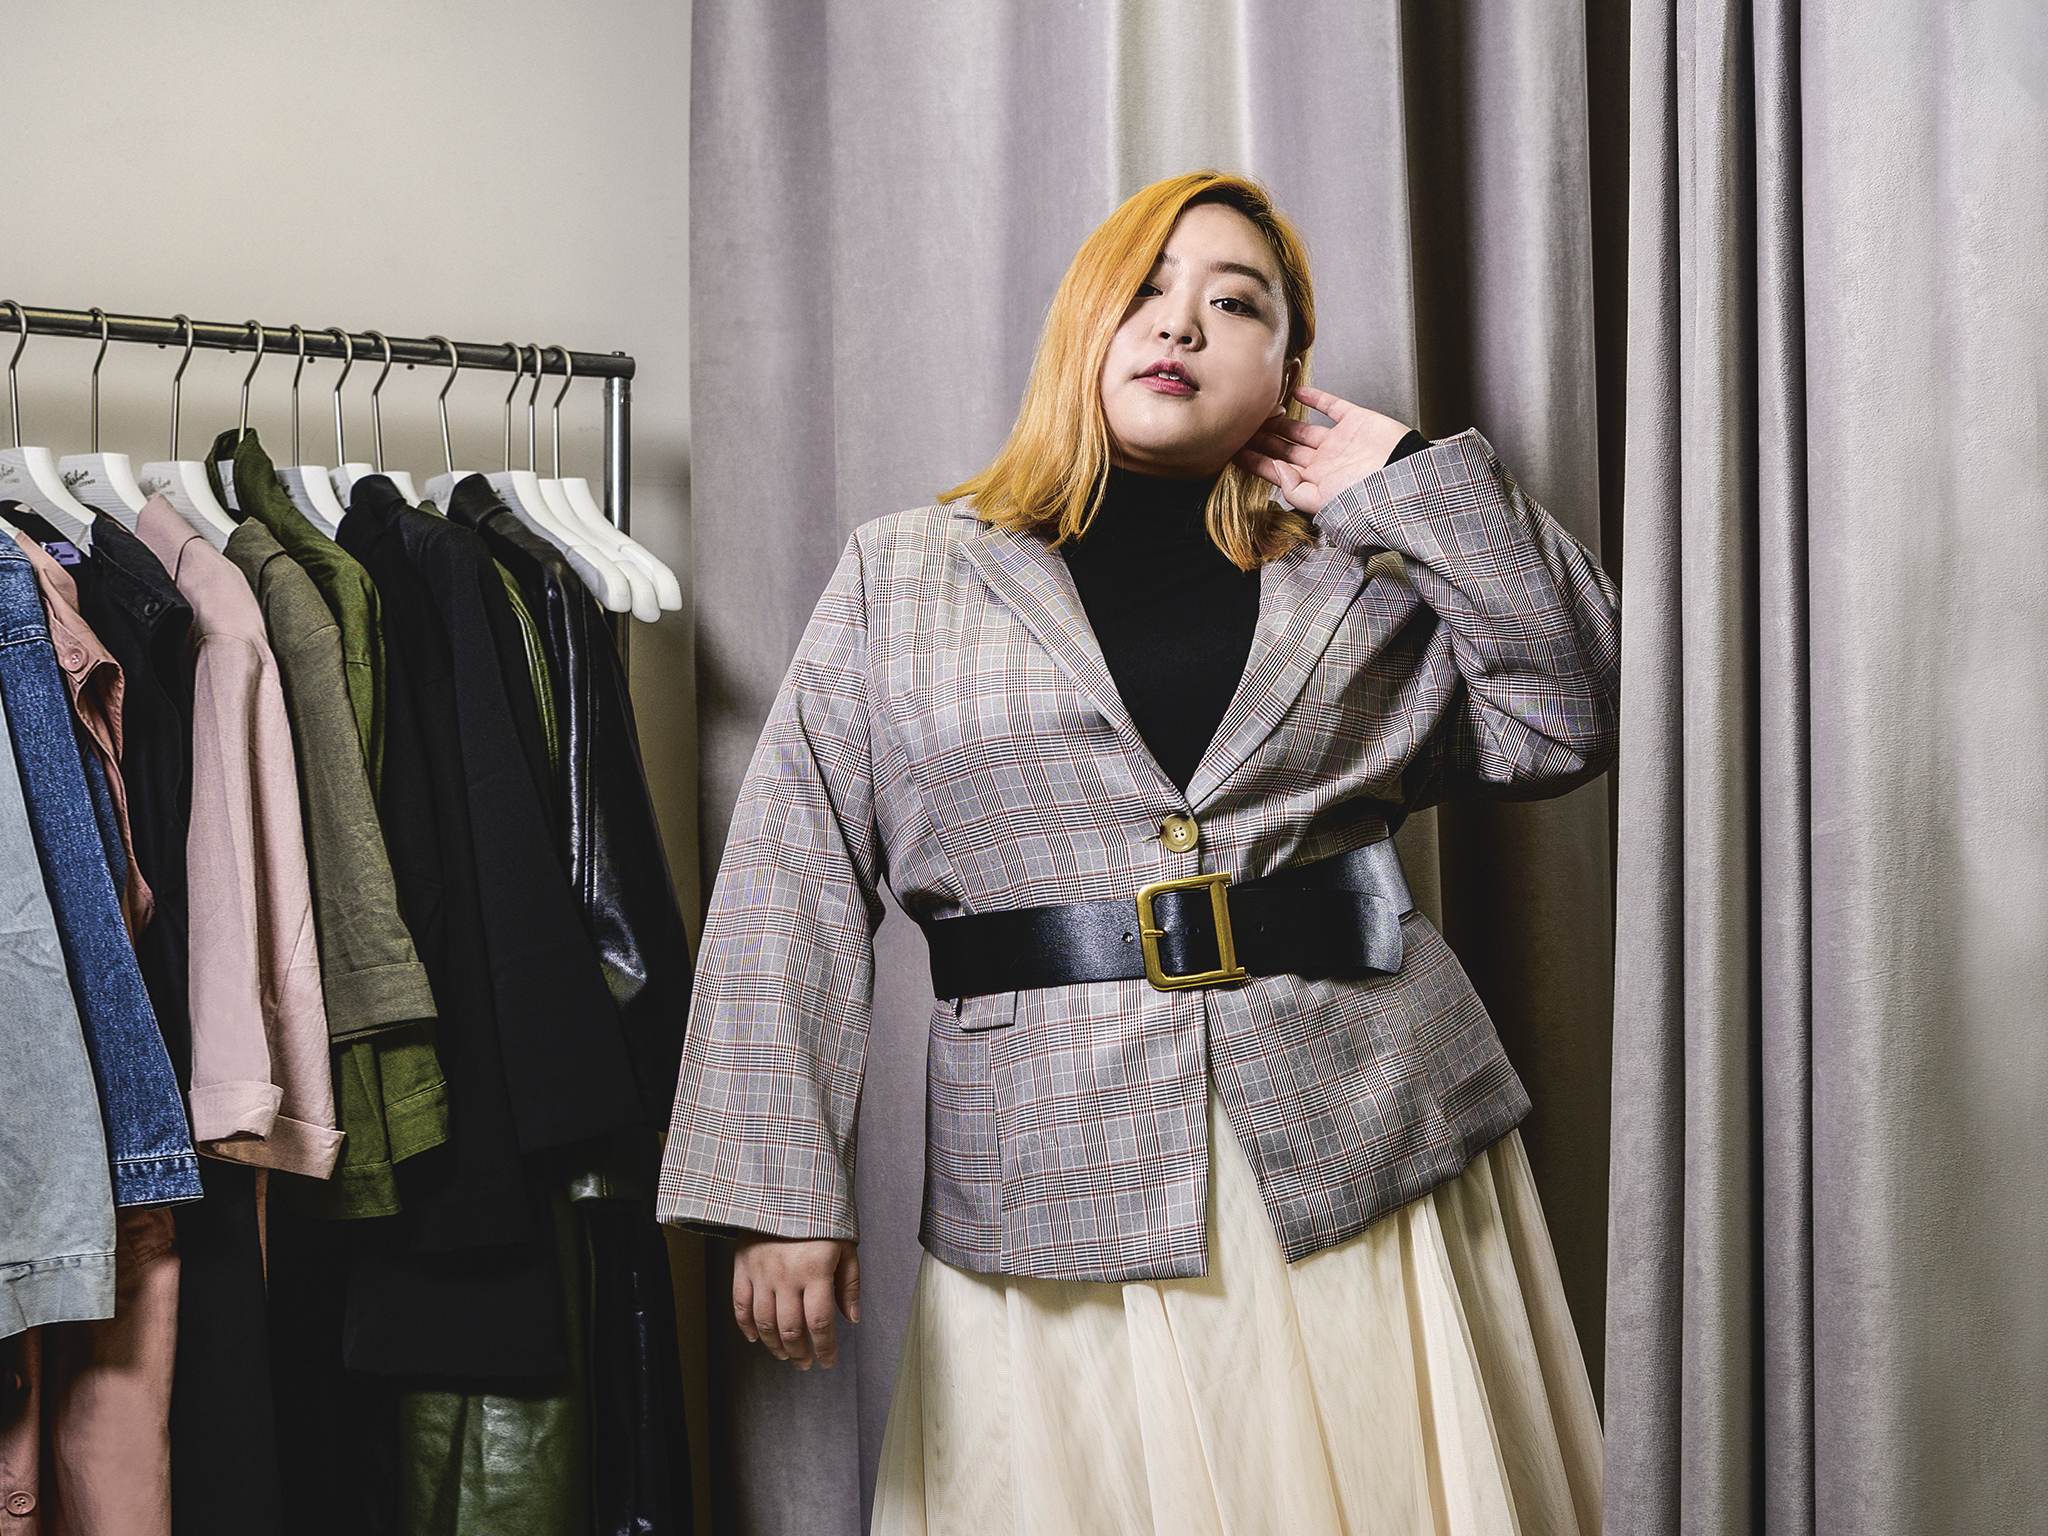 Fashion every size: a look into Hong Kong's plus-size